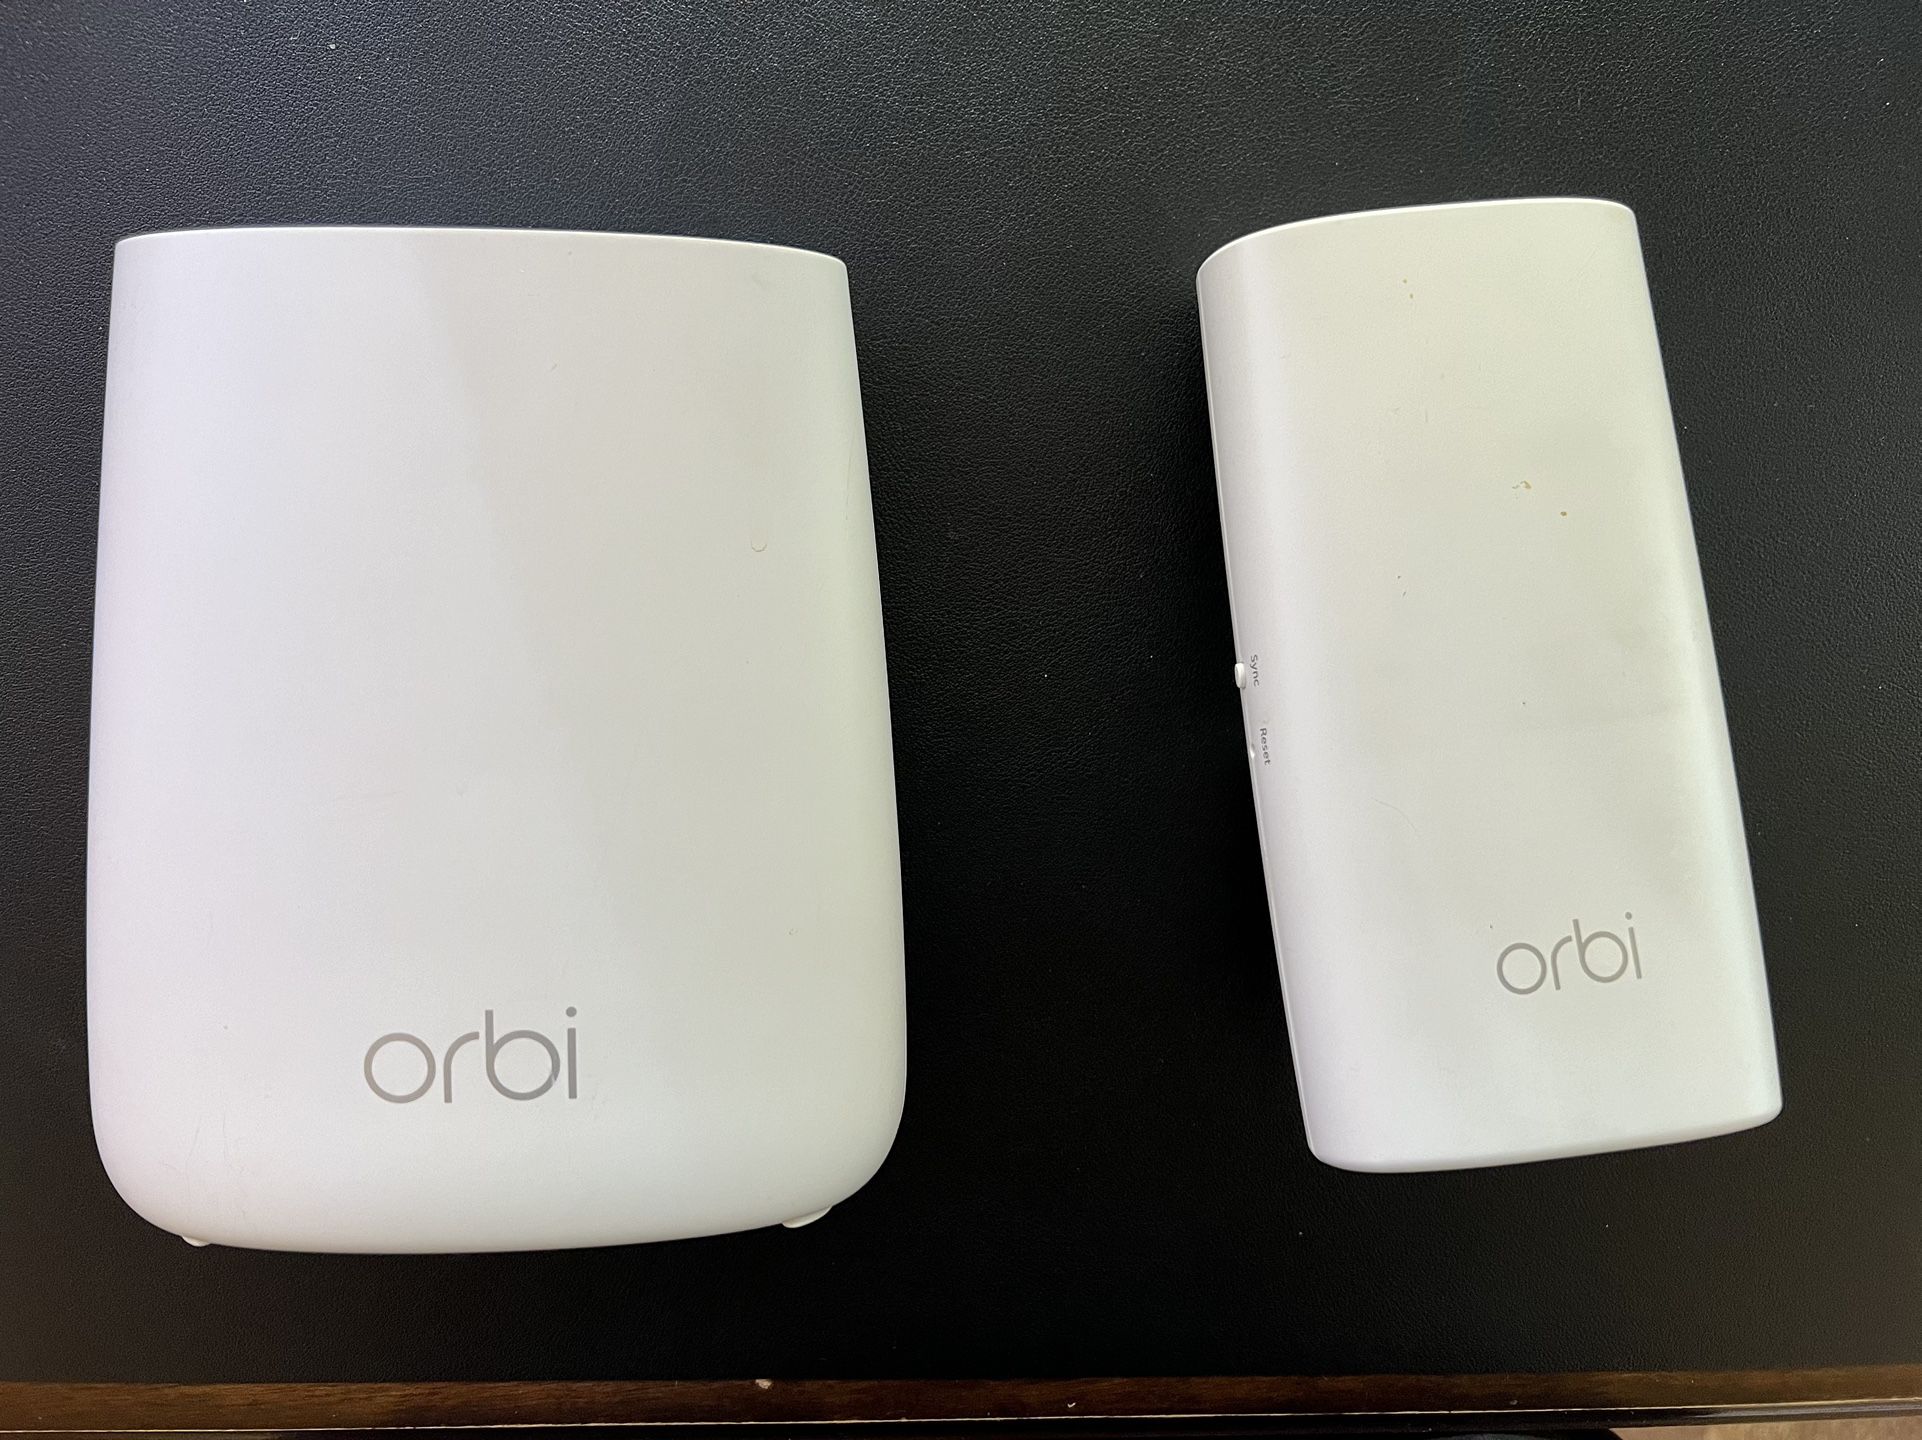 NETGEAR Orbi Router RBR20 With Satellite 